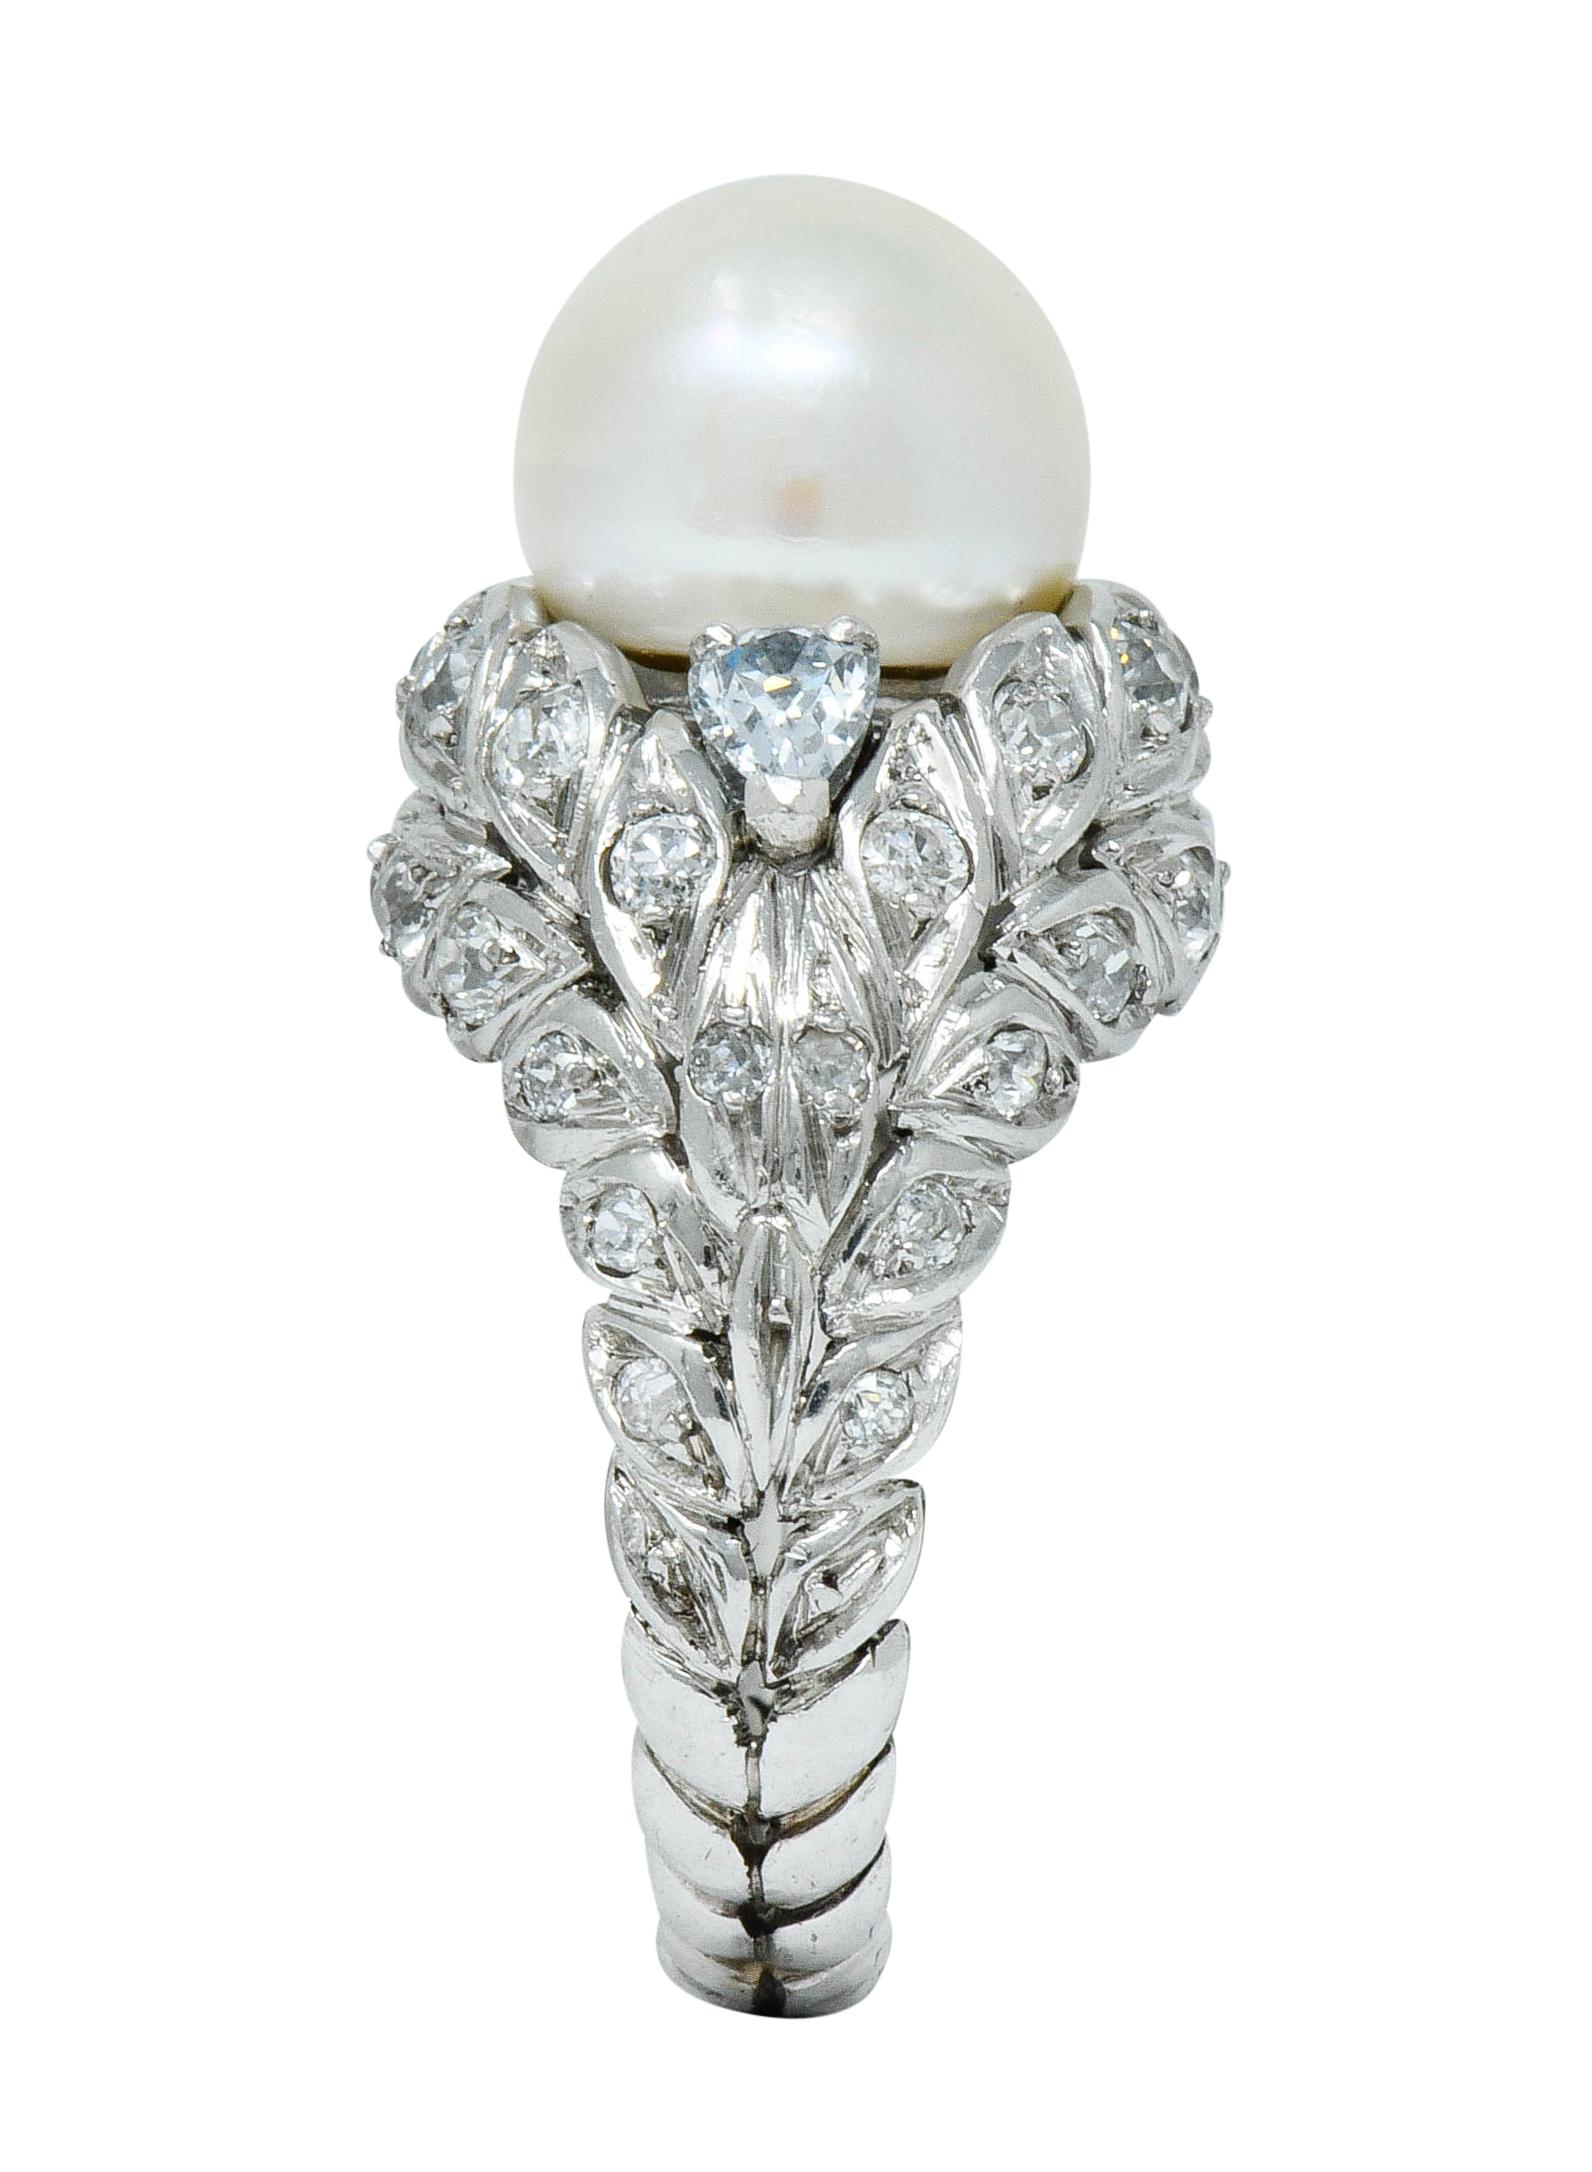 Statement ring is designed as a winding garland of foliate

Centering a large 11.3 mm natural button pearl, cream in body color with strong orient and very good luster

With a pear cut fancy light blue diamond weighing approximately 0.25 carat; VS2